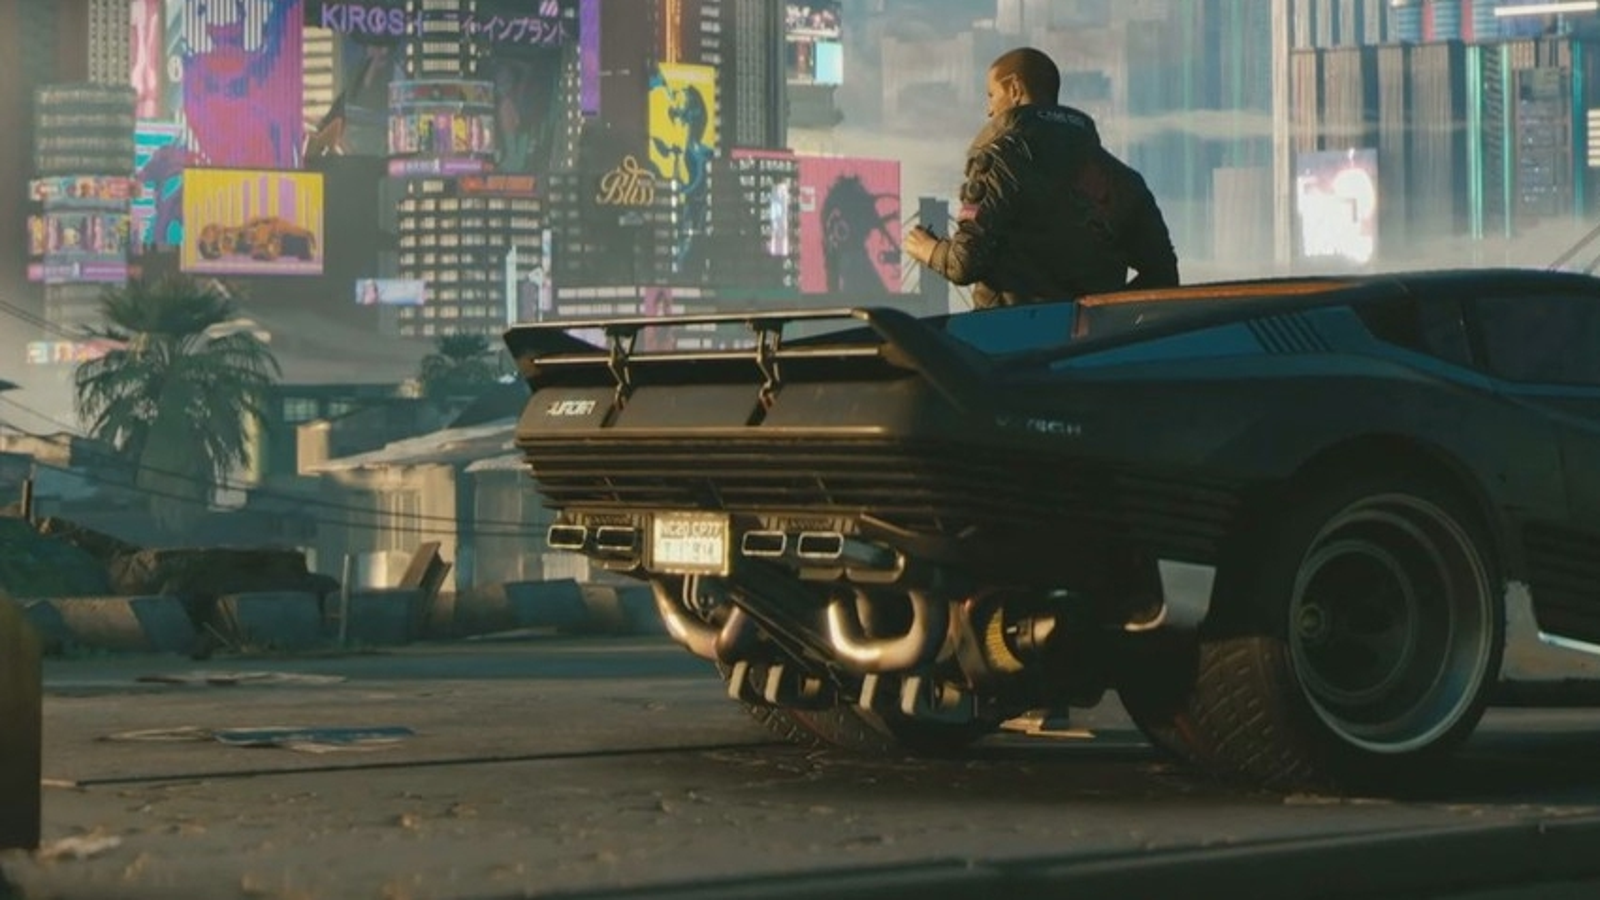 CYBERPUNK 2077 Gameplay Demo: In-Depth Analysis (with Video and Images)